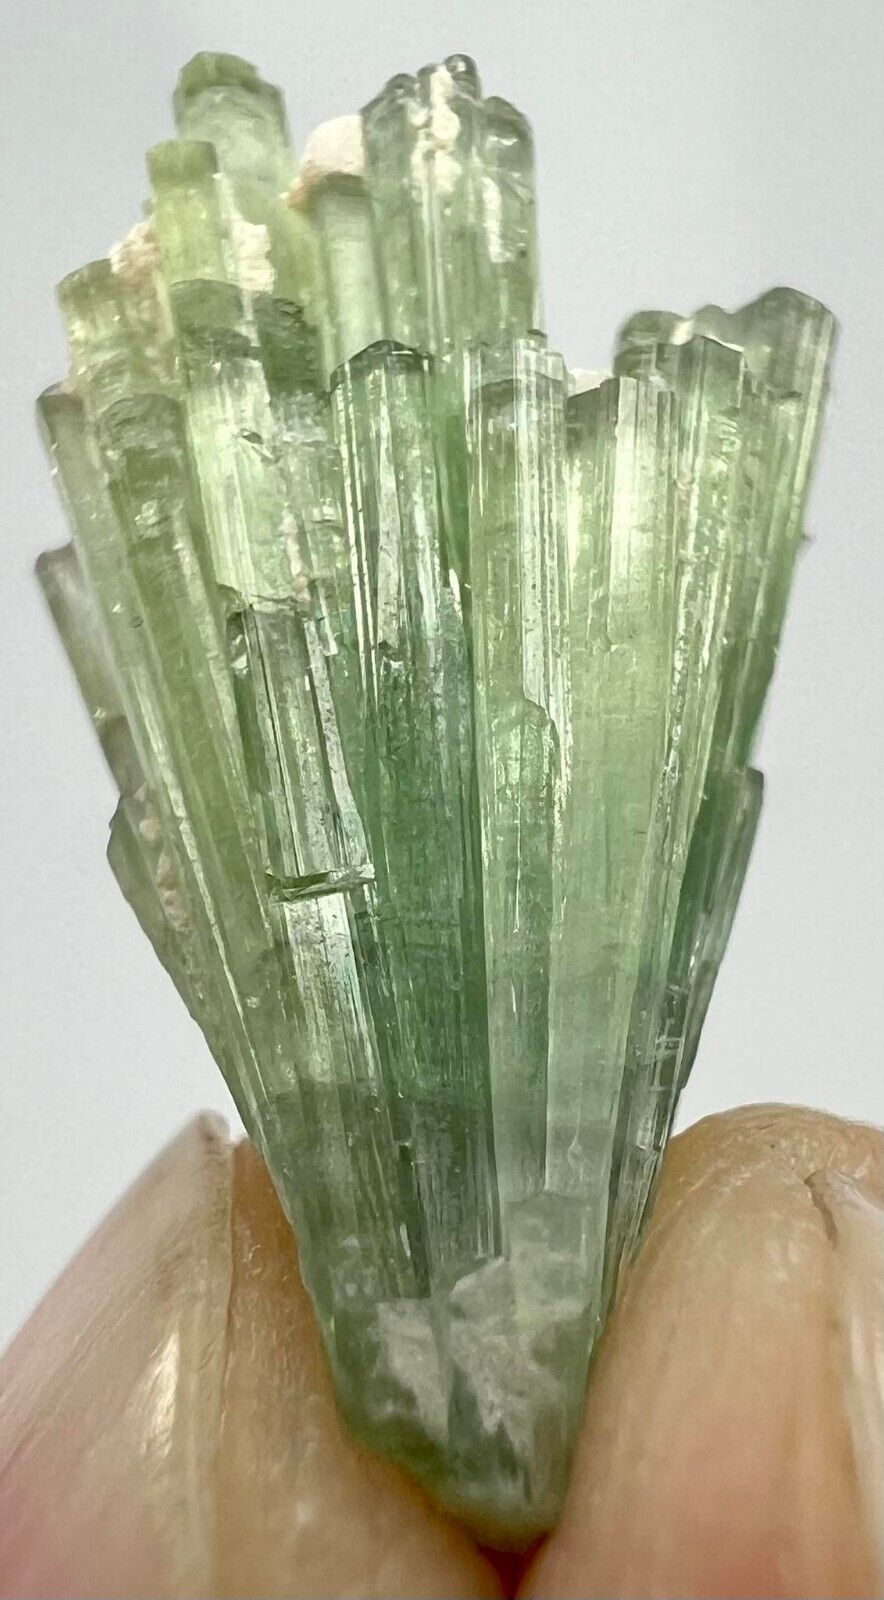 F/Well Terminated Amazing Green Tourmaline Crystals Bunch @AFG. 10 Carat